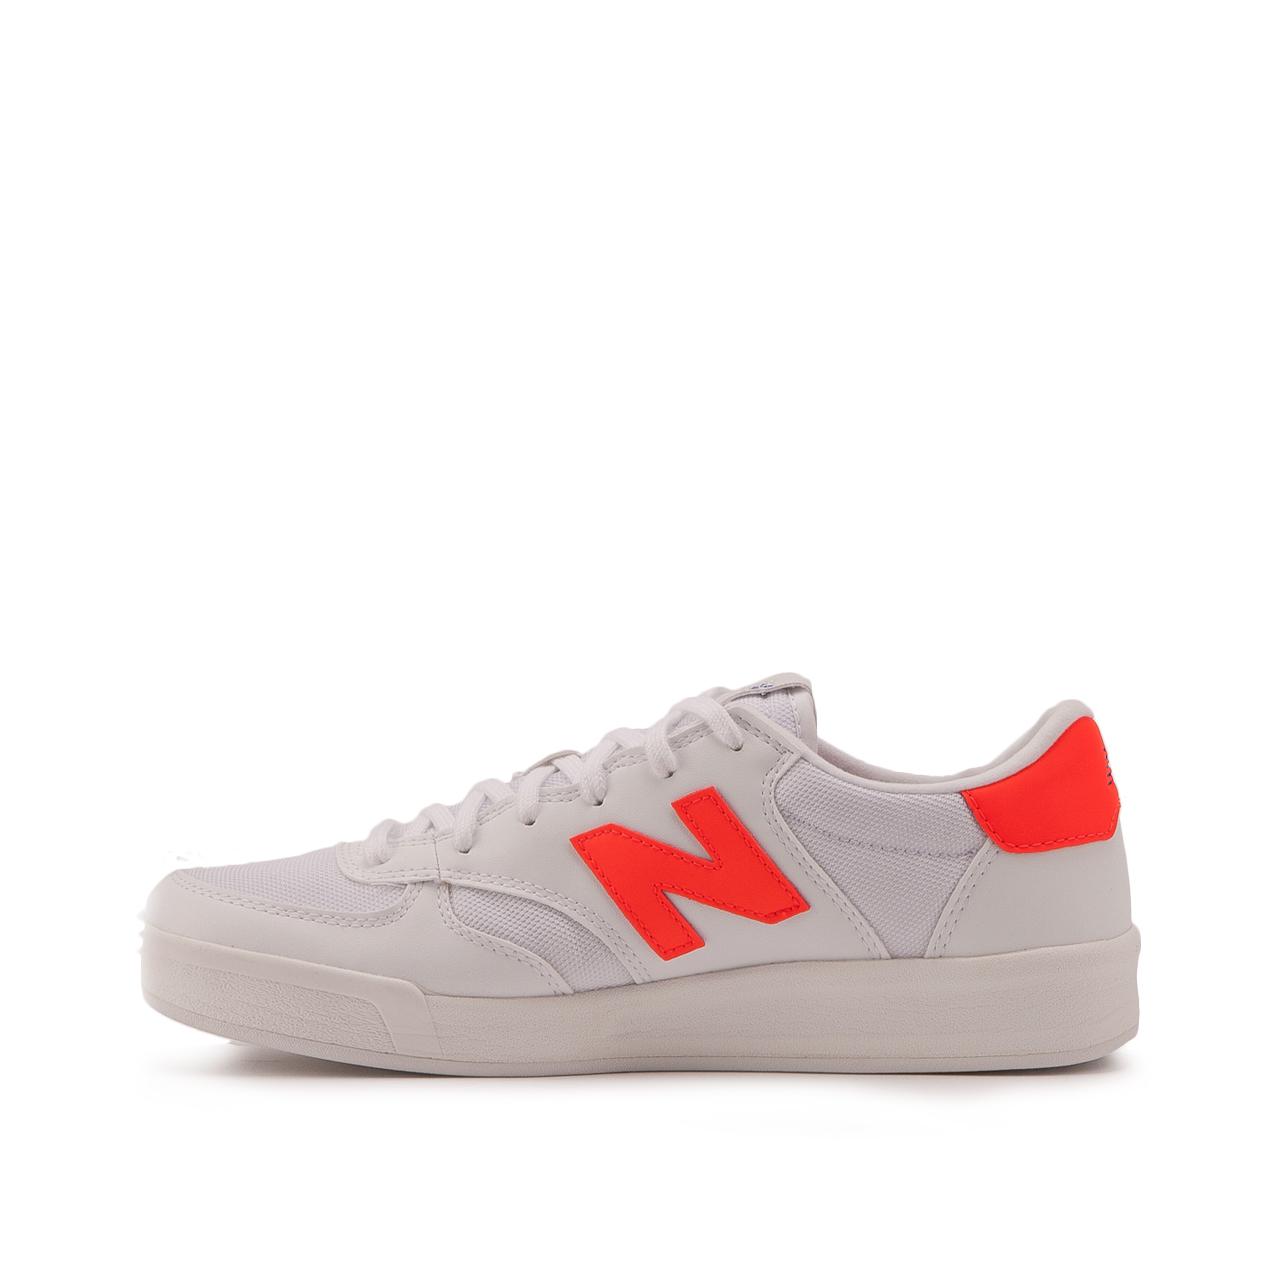 New Balance Leather Wrt 300 Cf in White - Lyst